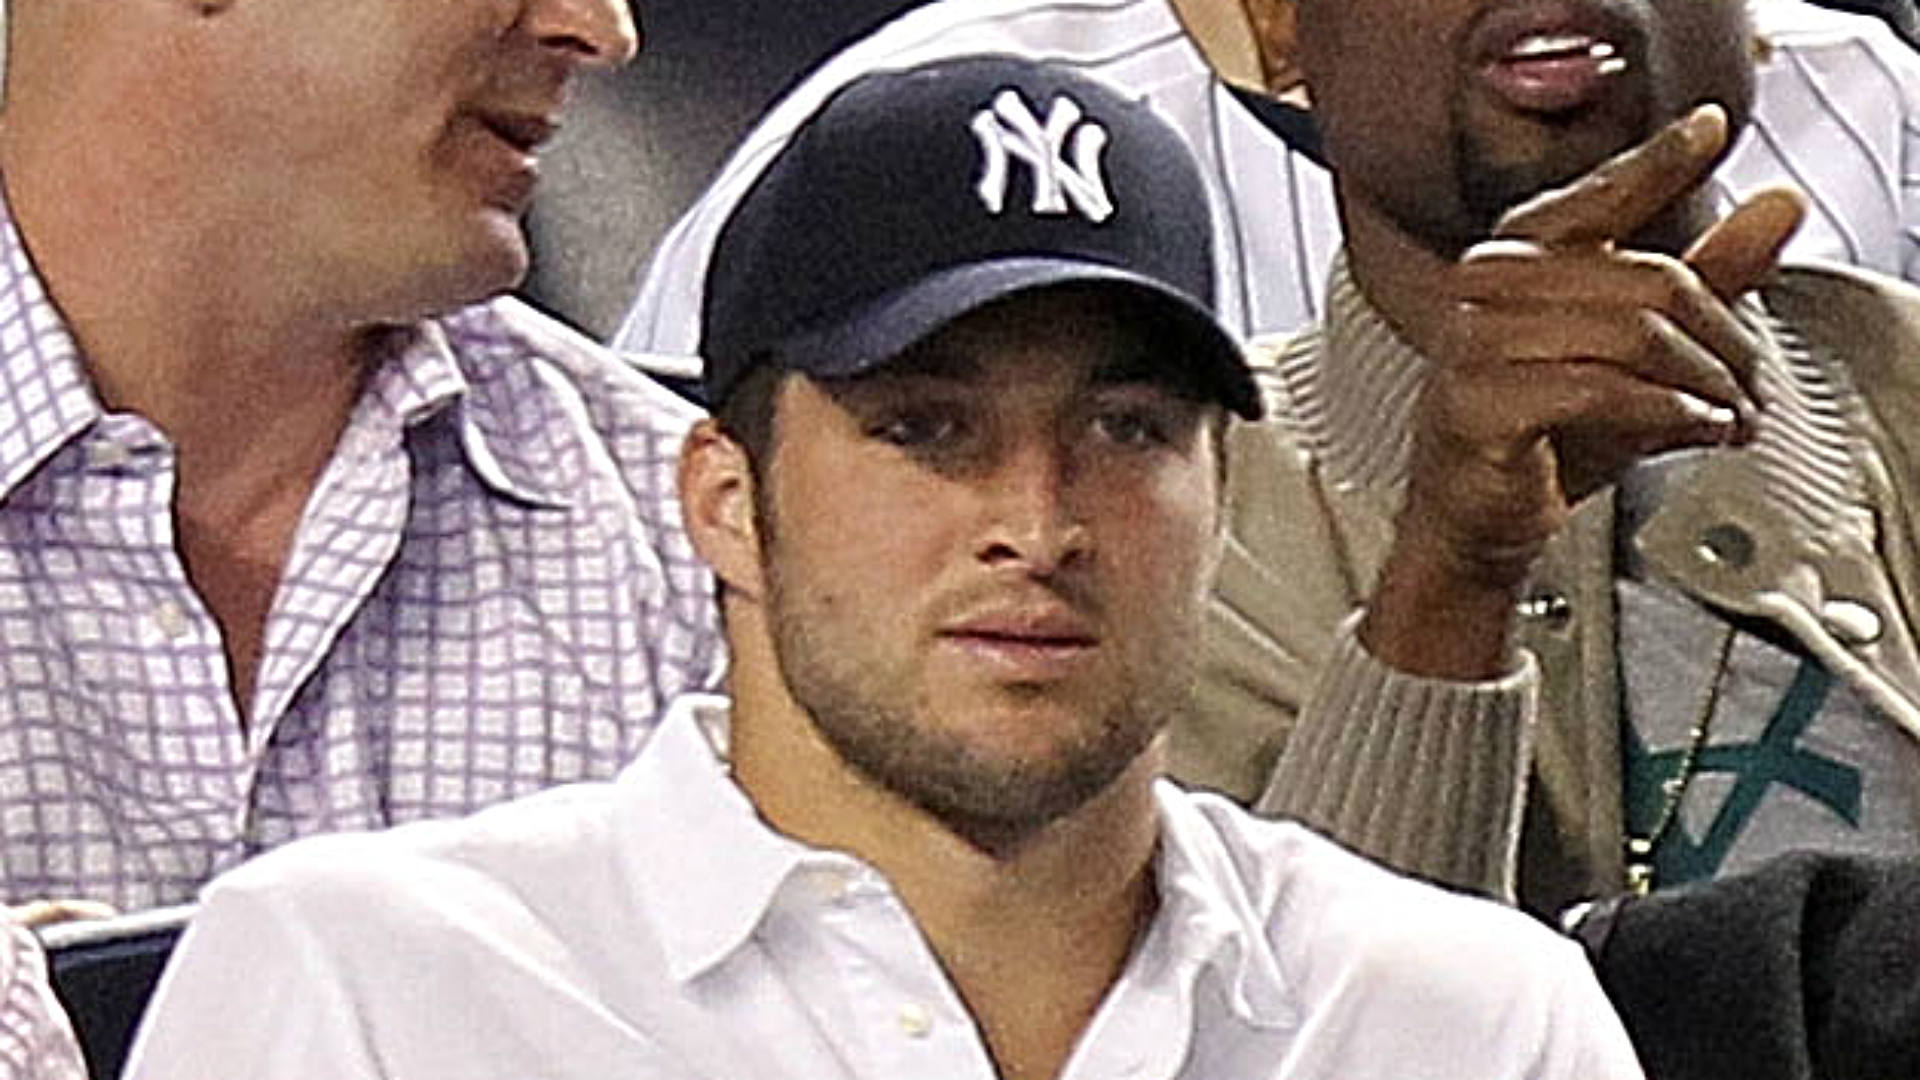 Tim Tebow's baseball career could get start in Venezuela, report says | Sporting News ...